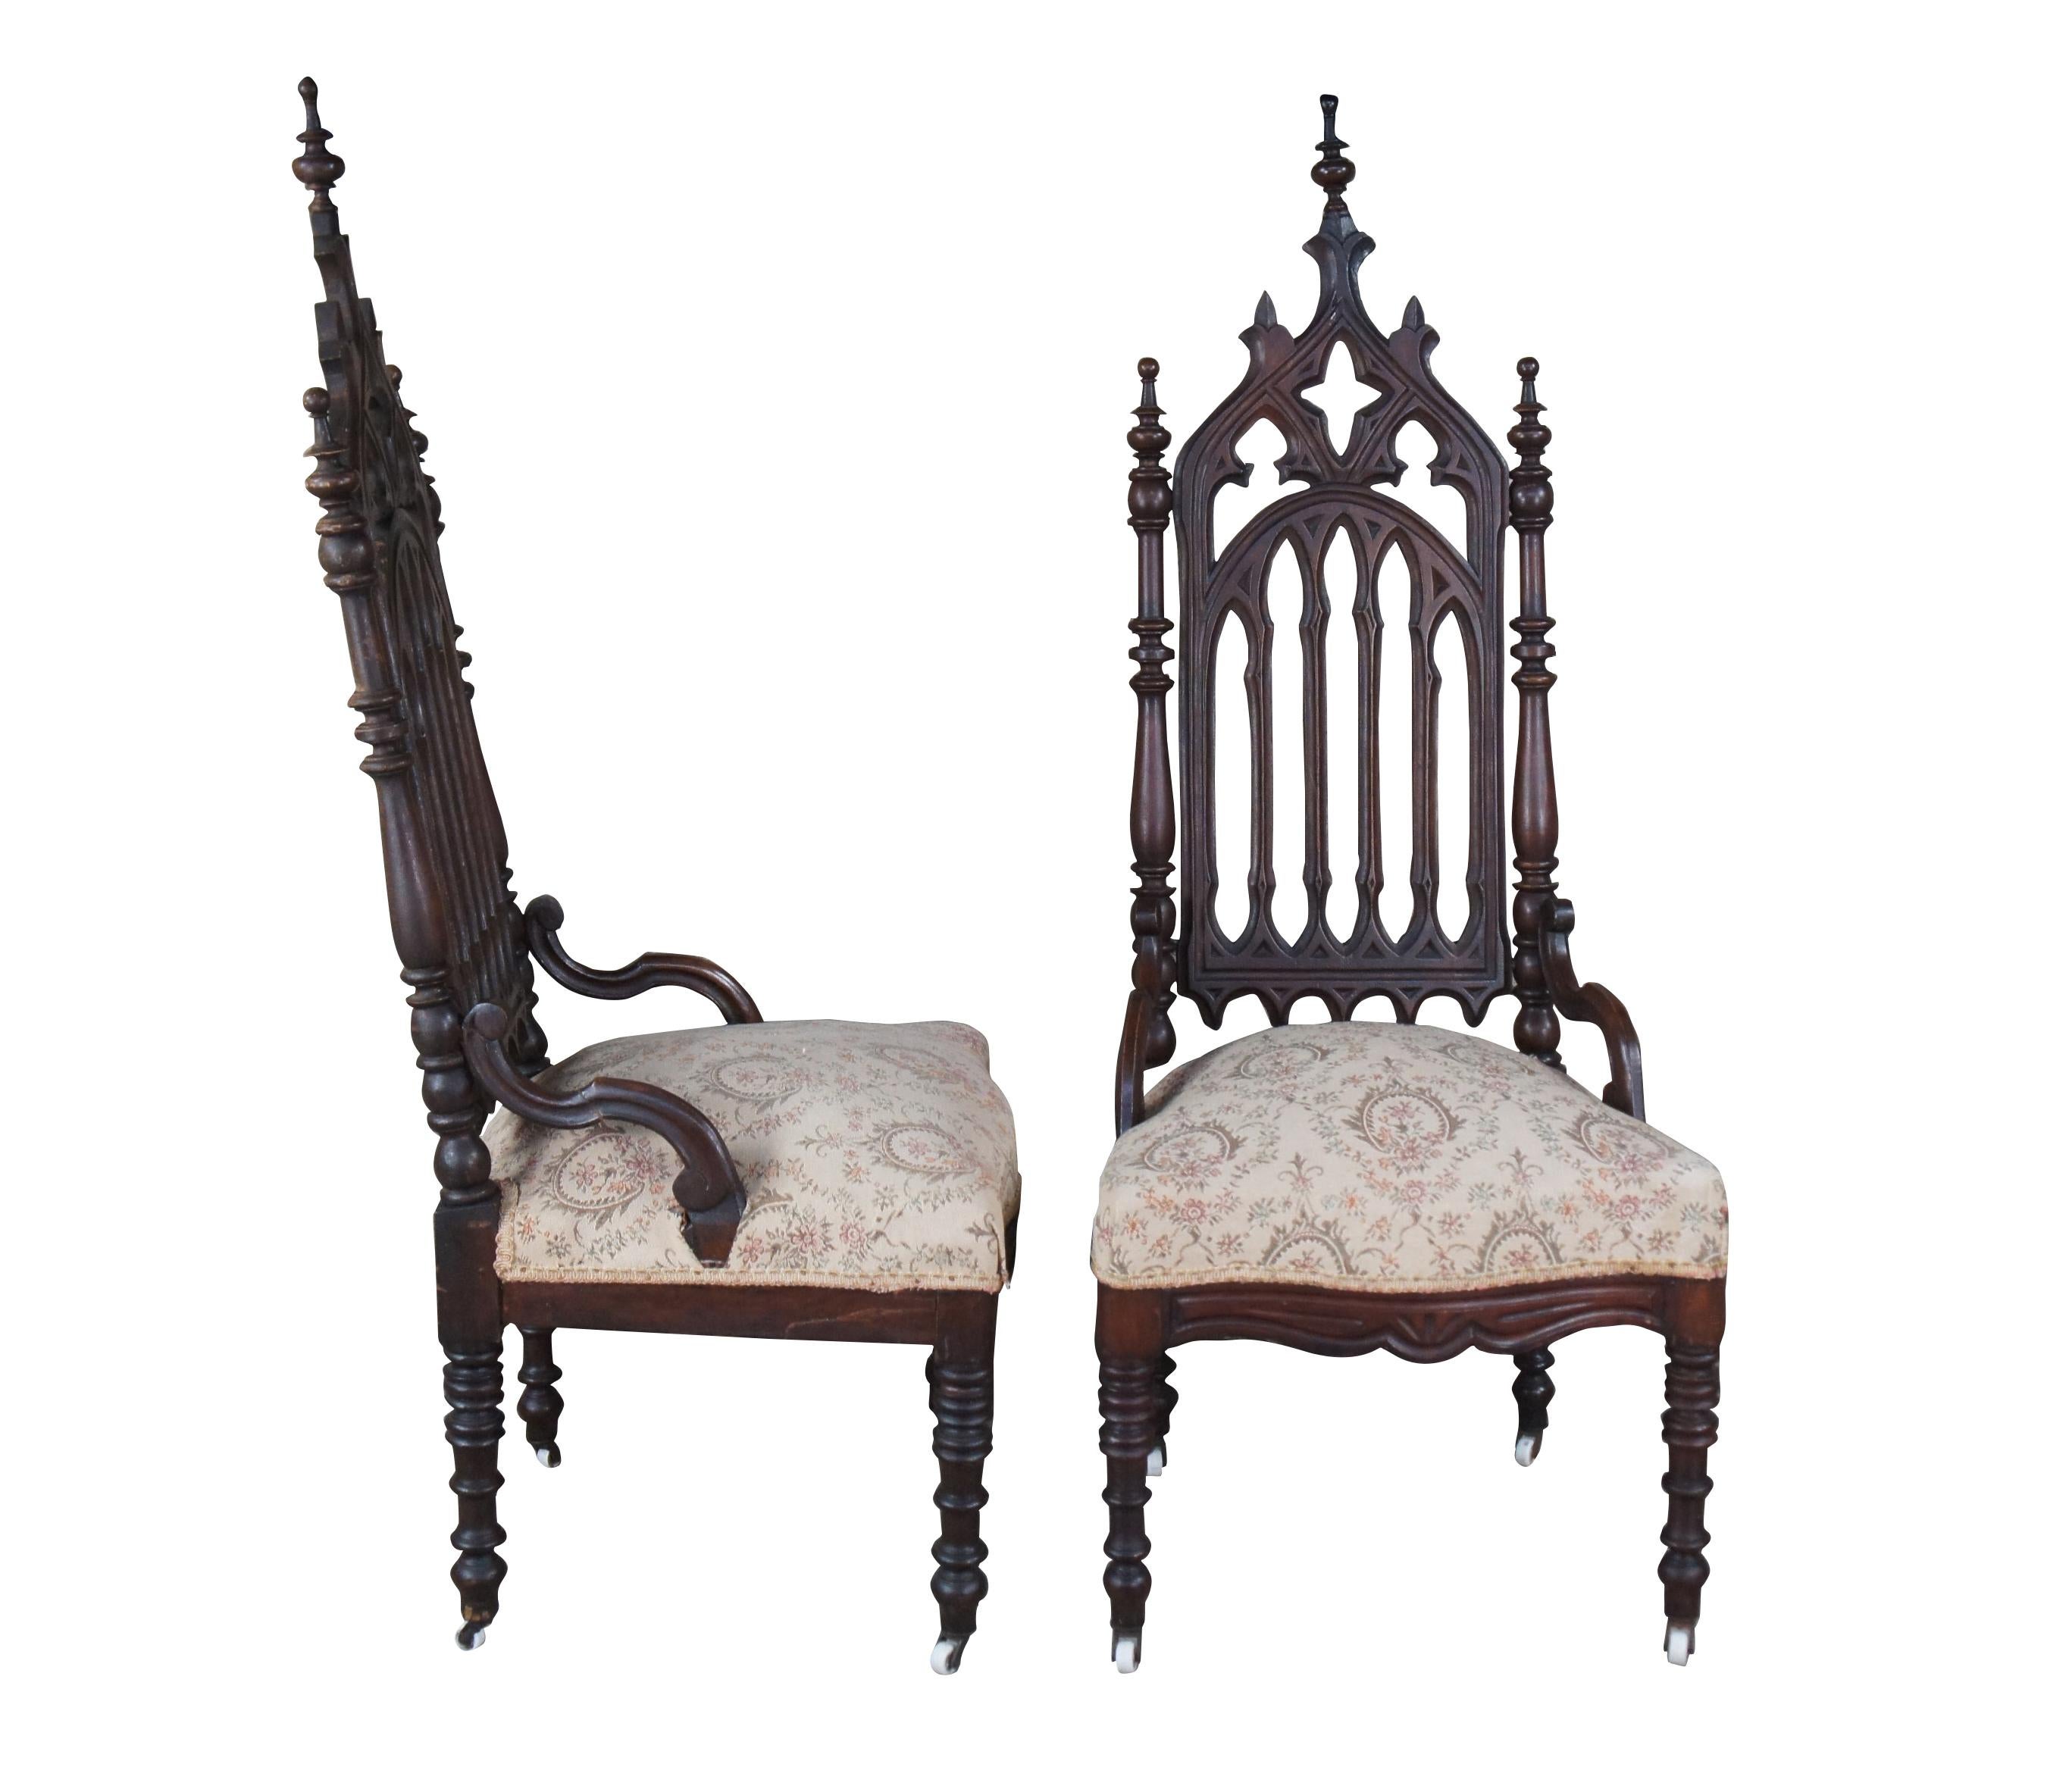 A pair of impressive Gothic / Renaissance revival occasional armchairs featuring ornate high relief pierced design with turned legs and posts over casters.

The Gothic Revival style is part of the mid-19th century picturesque and romantic movement